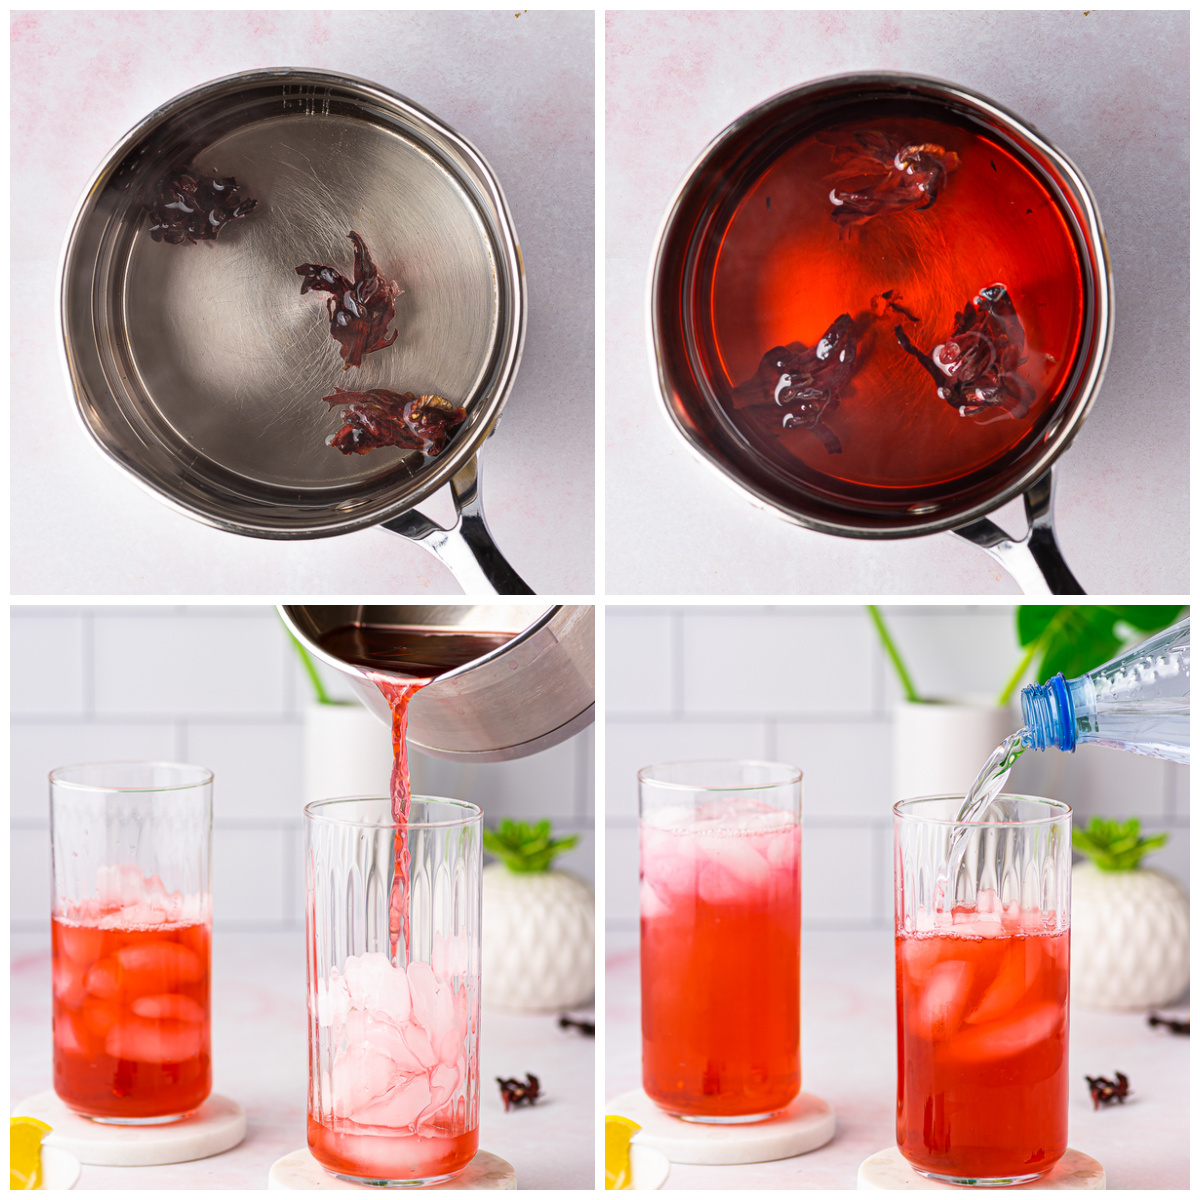 Step by step photos on how to make a Hibiscus Tea Recipe